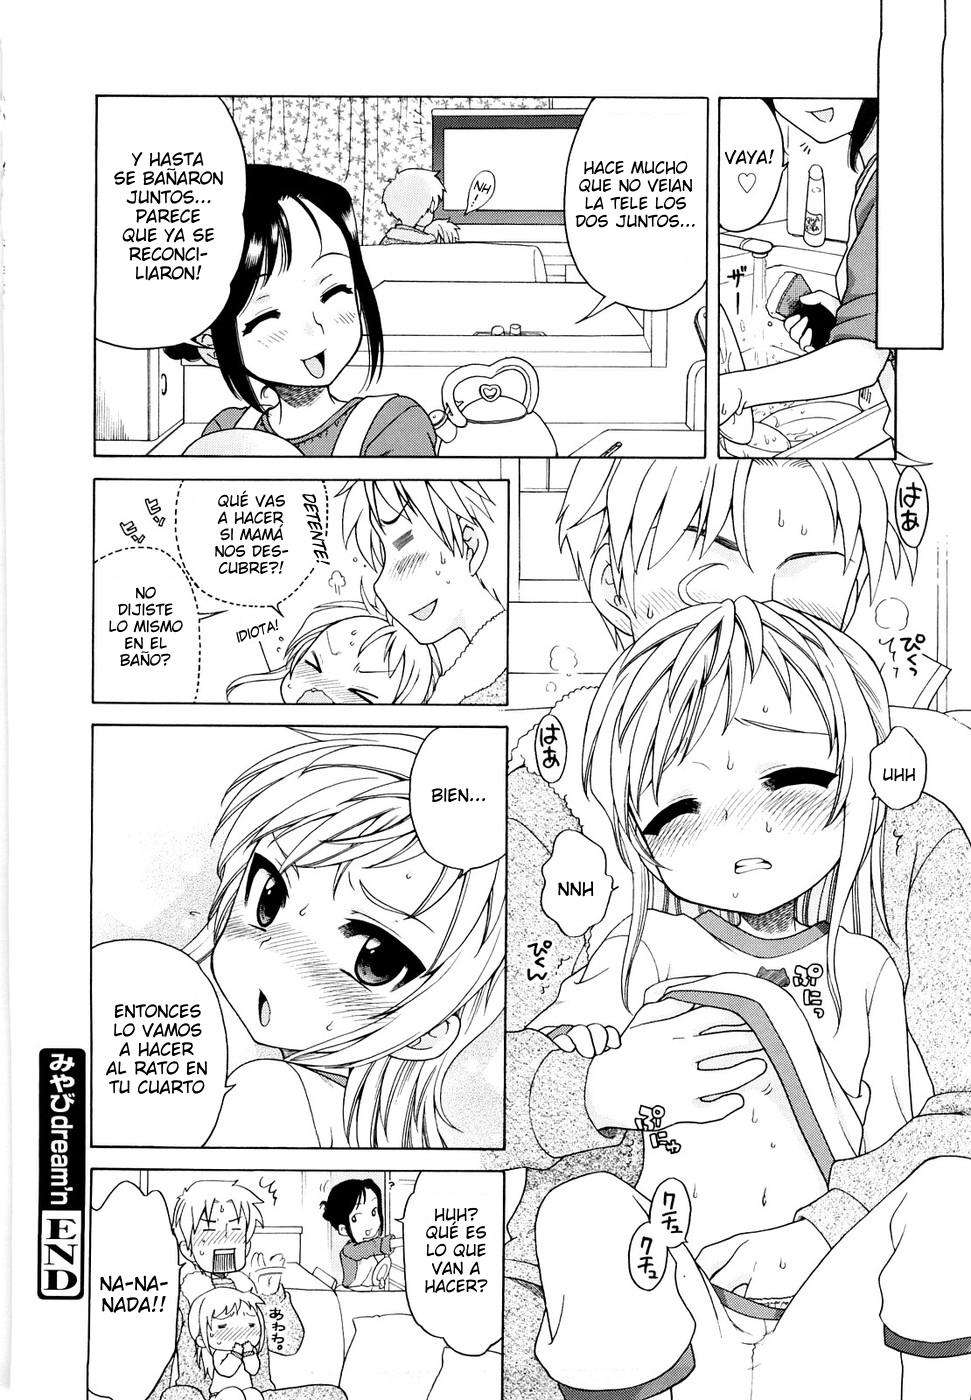 Onii-chan!! Me gustas.. Chapter-1 - 20